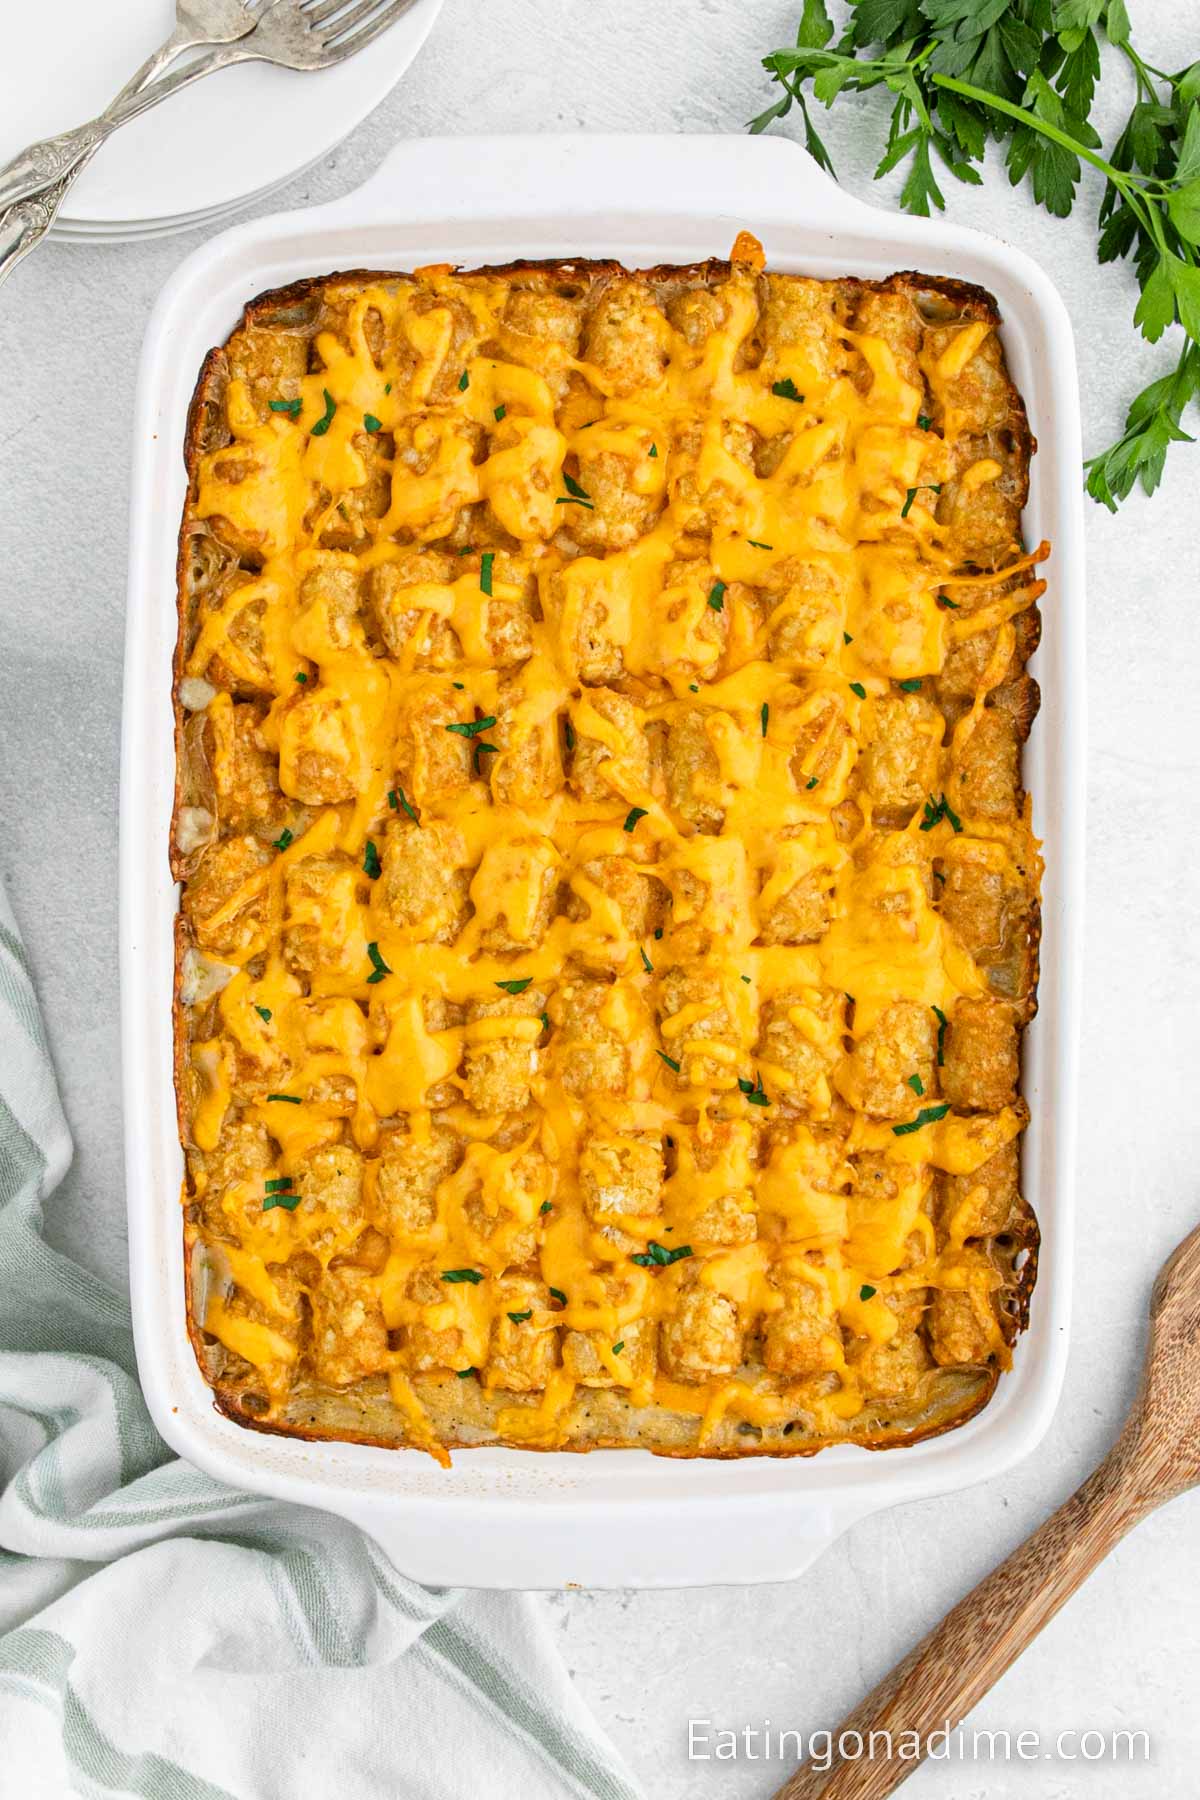 Chicken Tater Tot Casserole in a baking dish